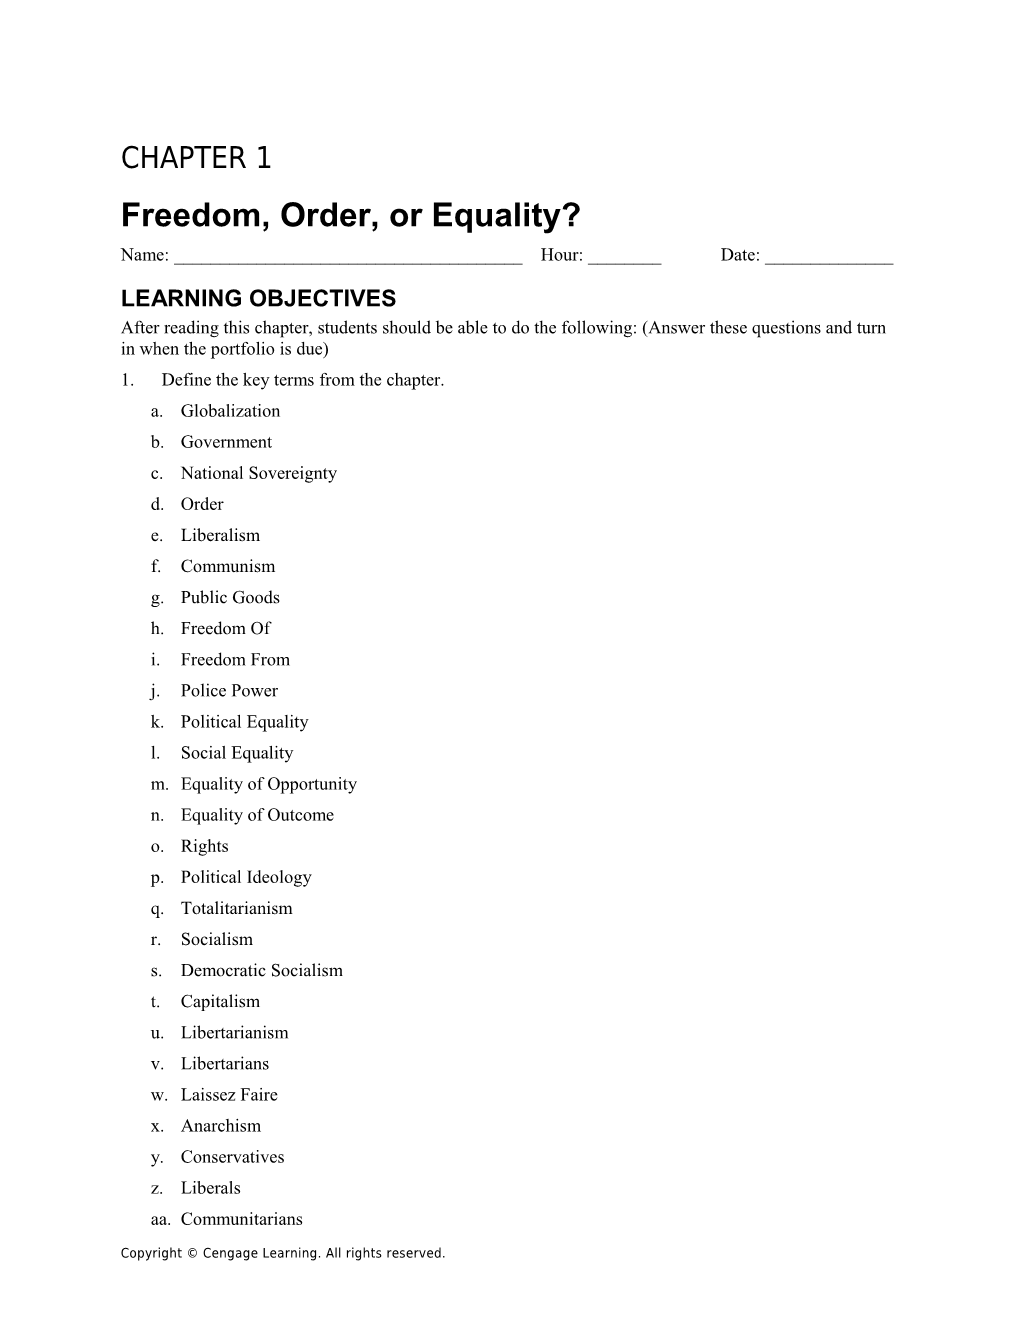 Chapter 1: Freedom, Order, Or Equality?